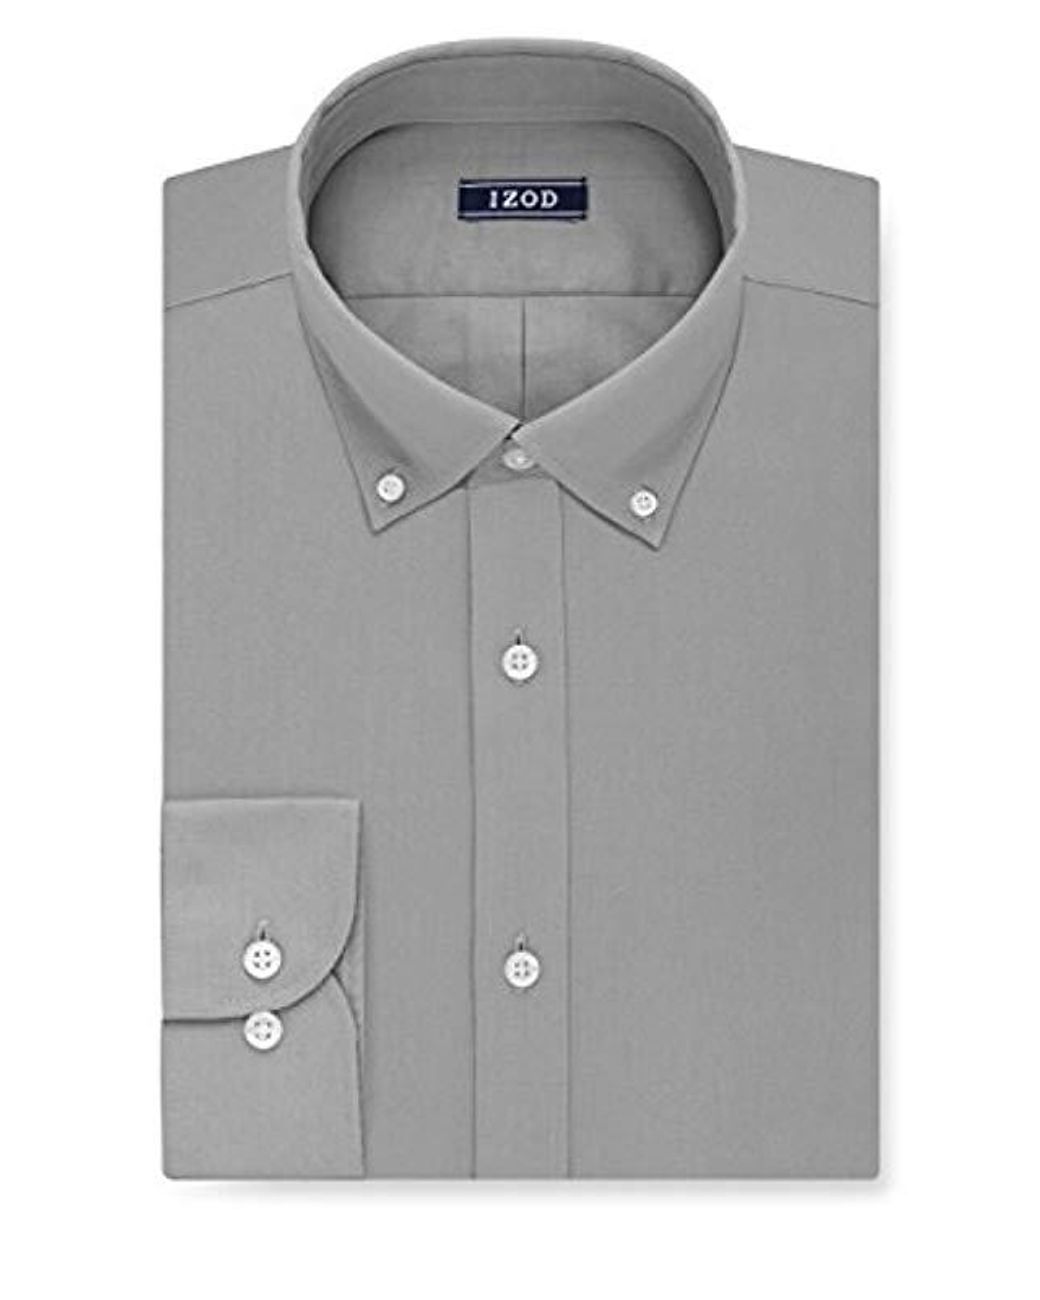 Lyst - Izod Slim Fit Solid Button Down Collar Dress Shirt in Gray for Men